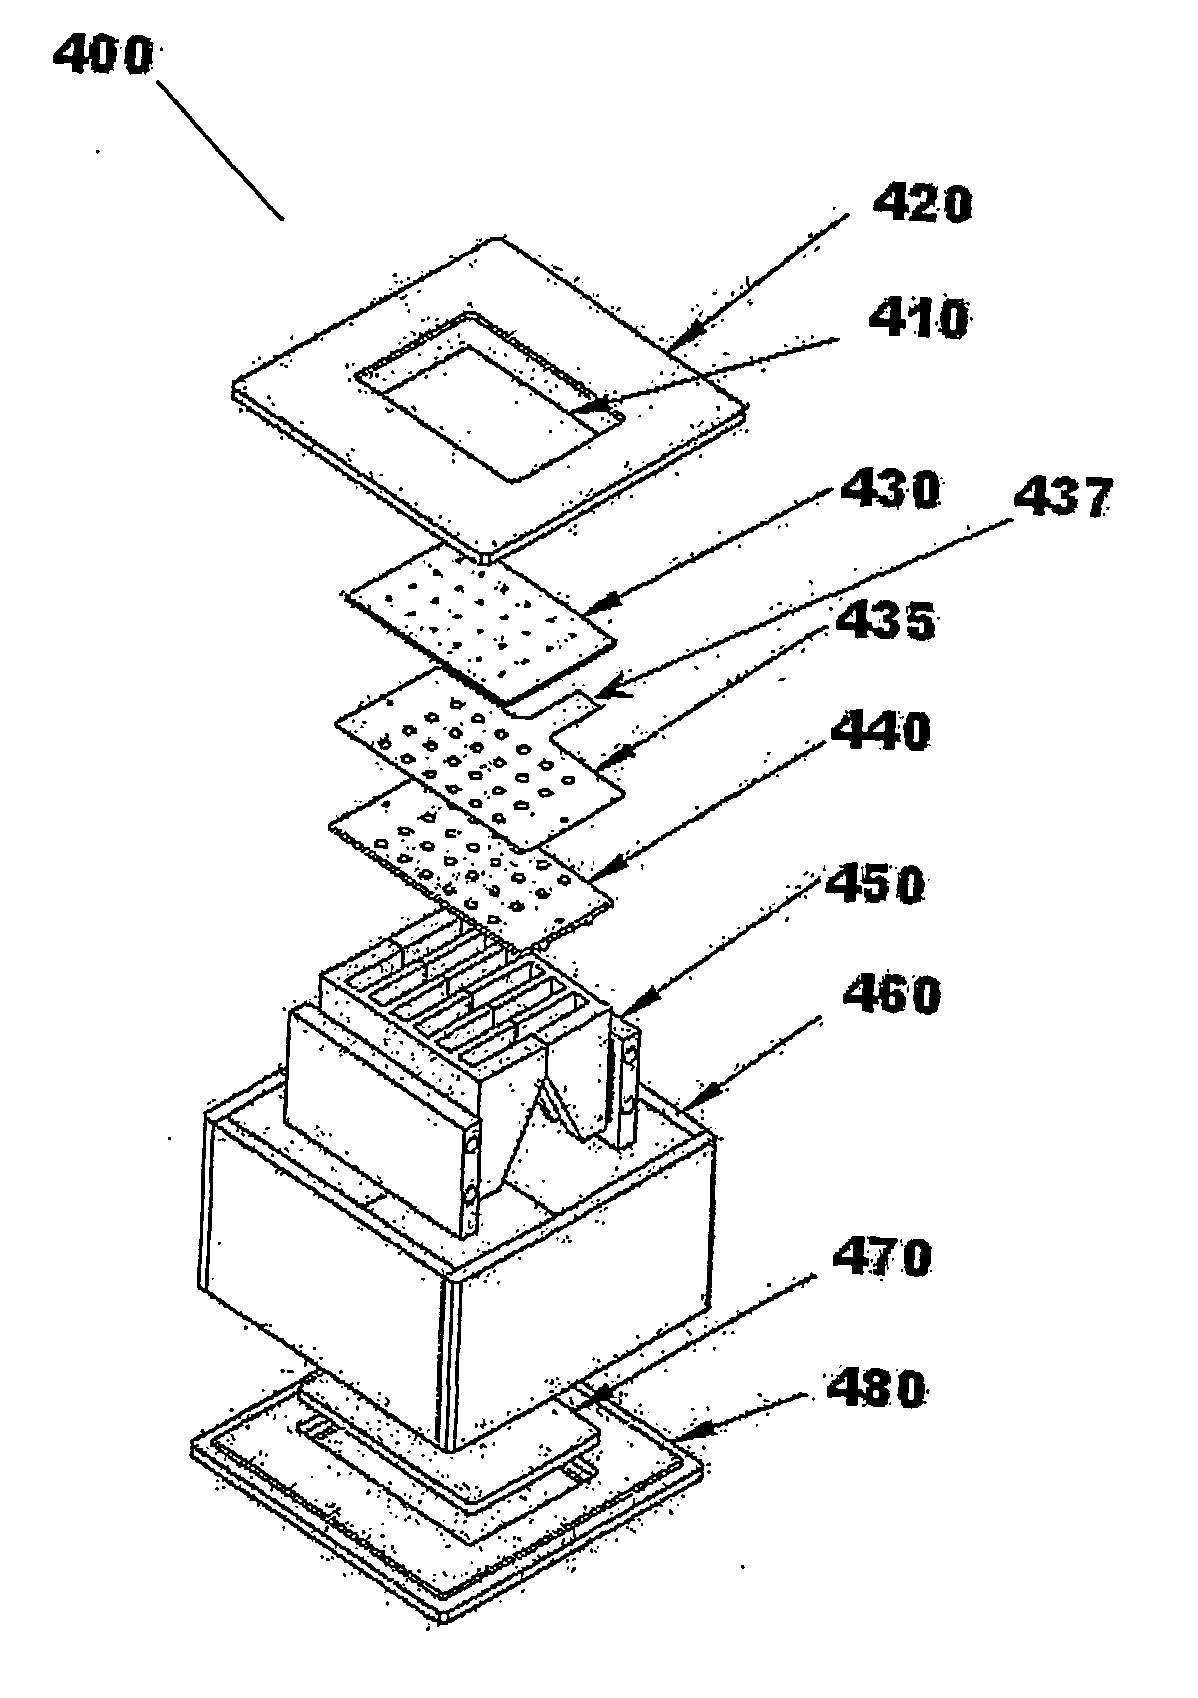 Freeze-drying microscope stage apparatus and process of using the same